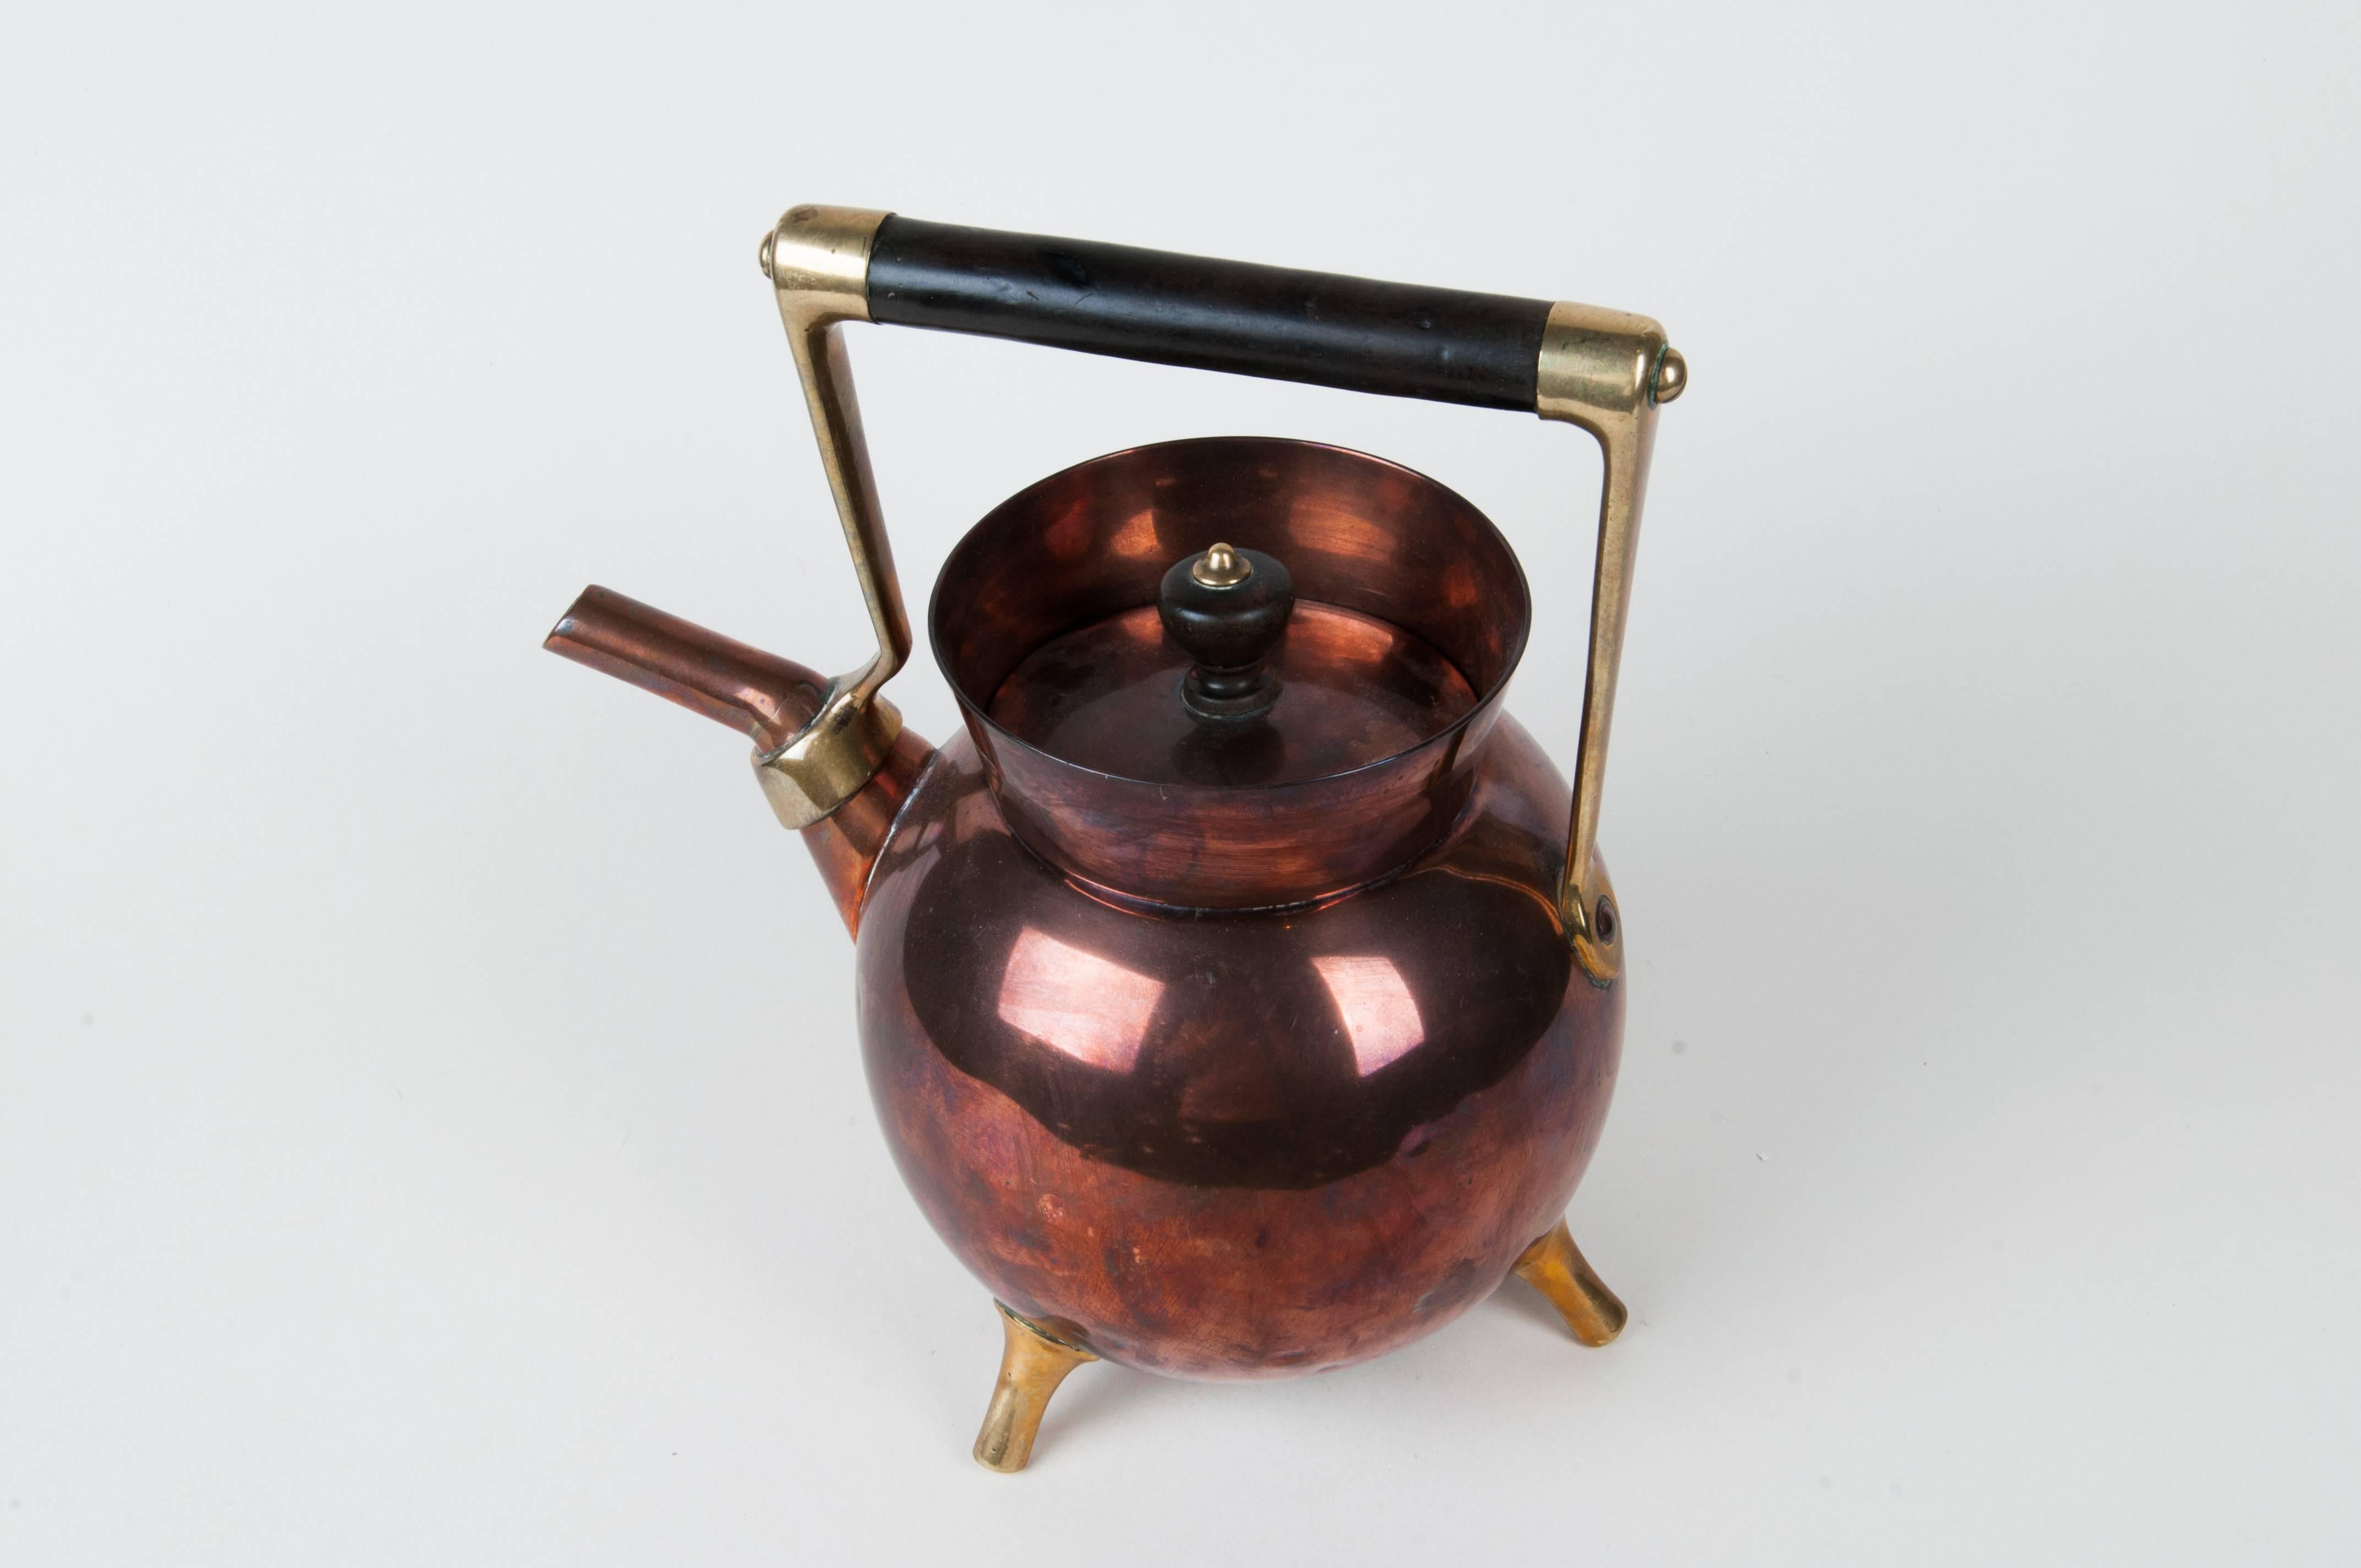 Christopher dresser teapot
Made by Benham & Fround, London
Copper and brass, ebony handle
Marker's mark,
circa 1885
Size: 9.3" H.